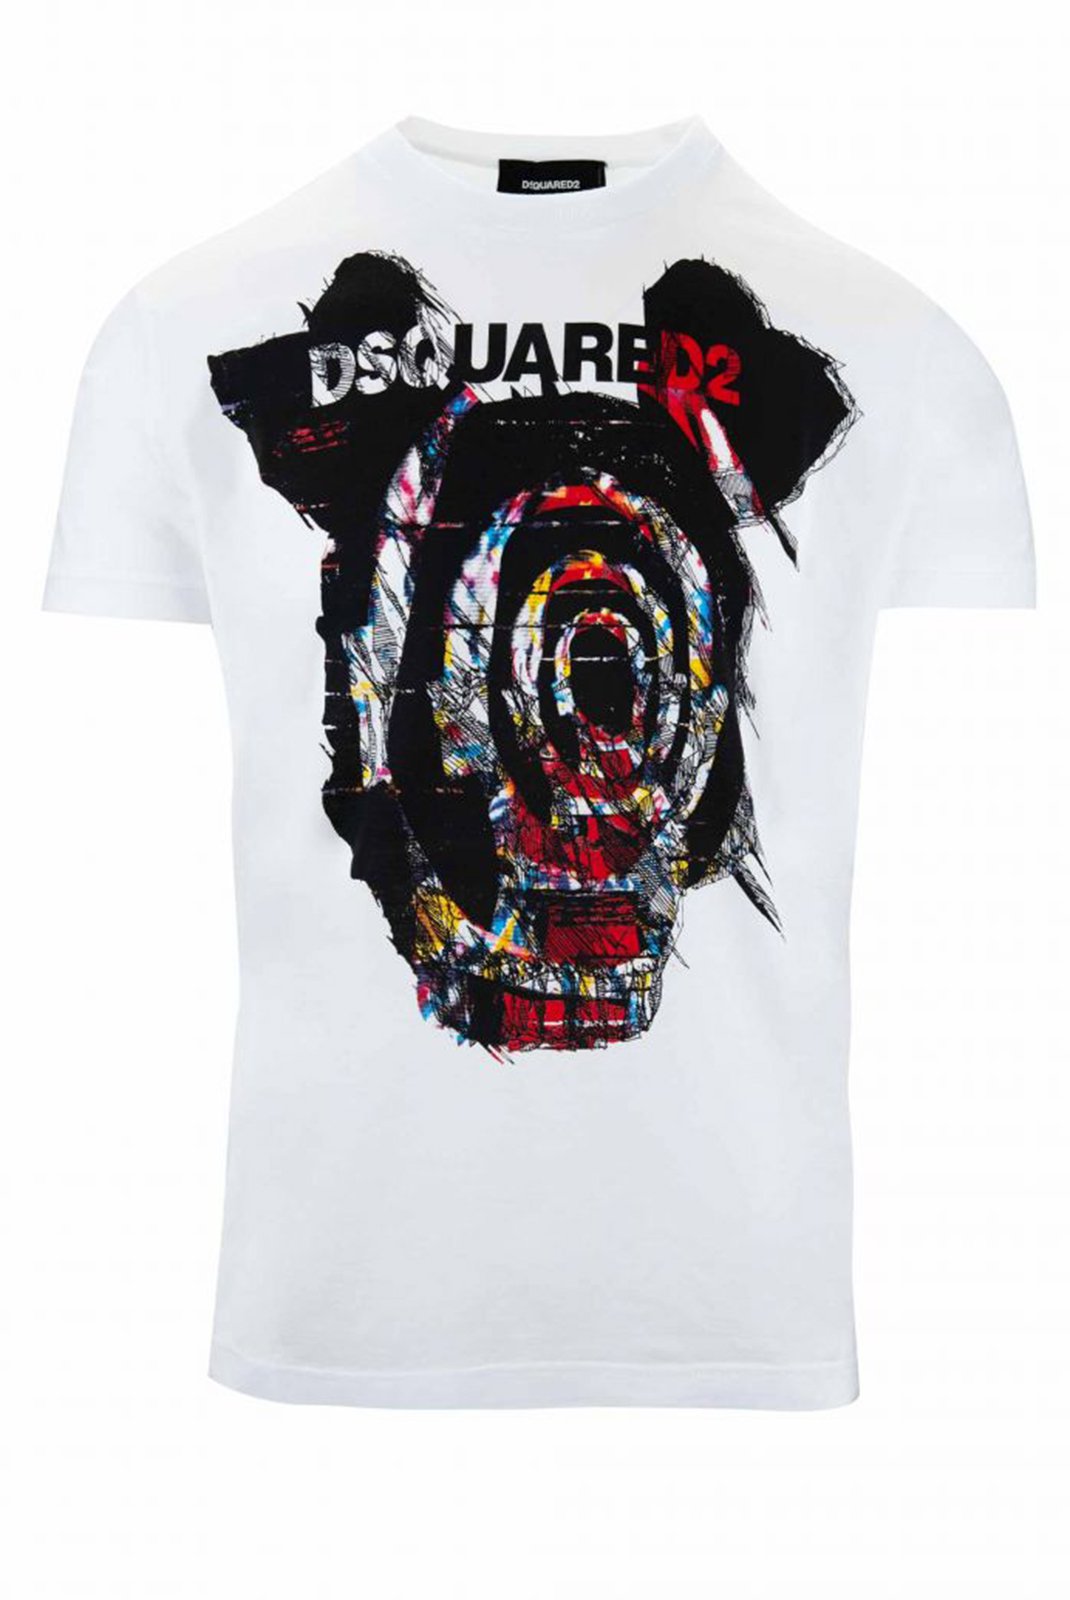 T-S manches courtes  Dsquared2 S71GD0804 100 WHITE